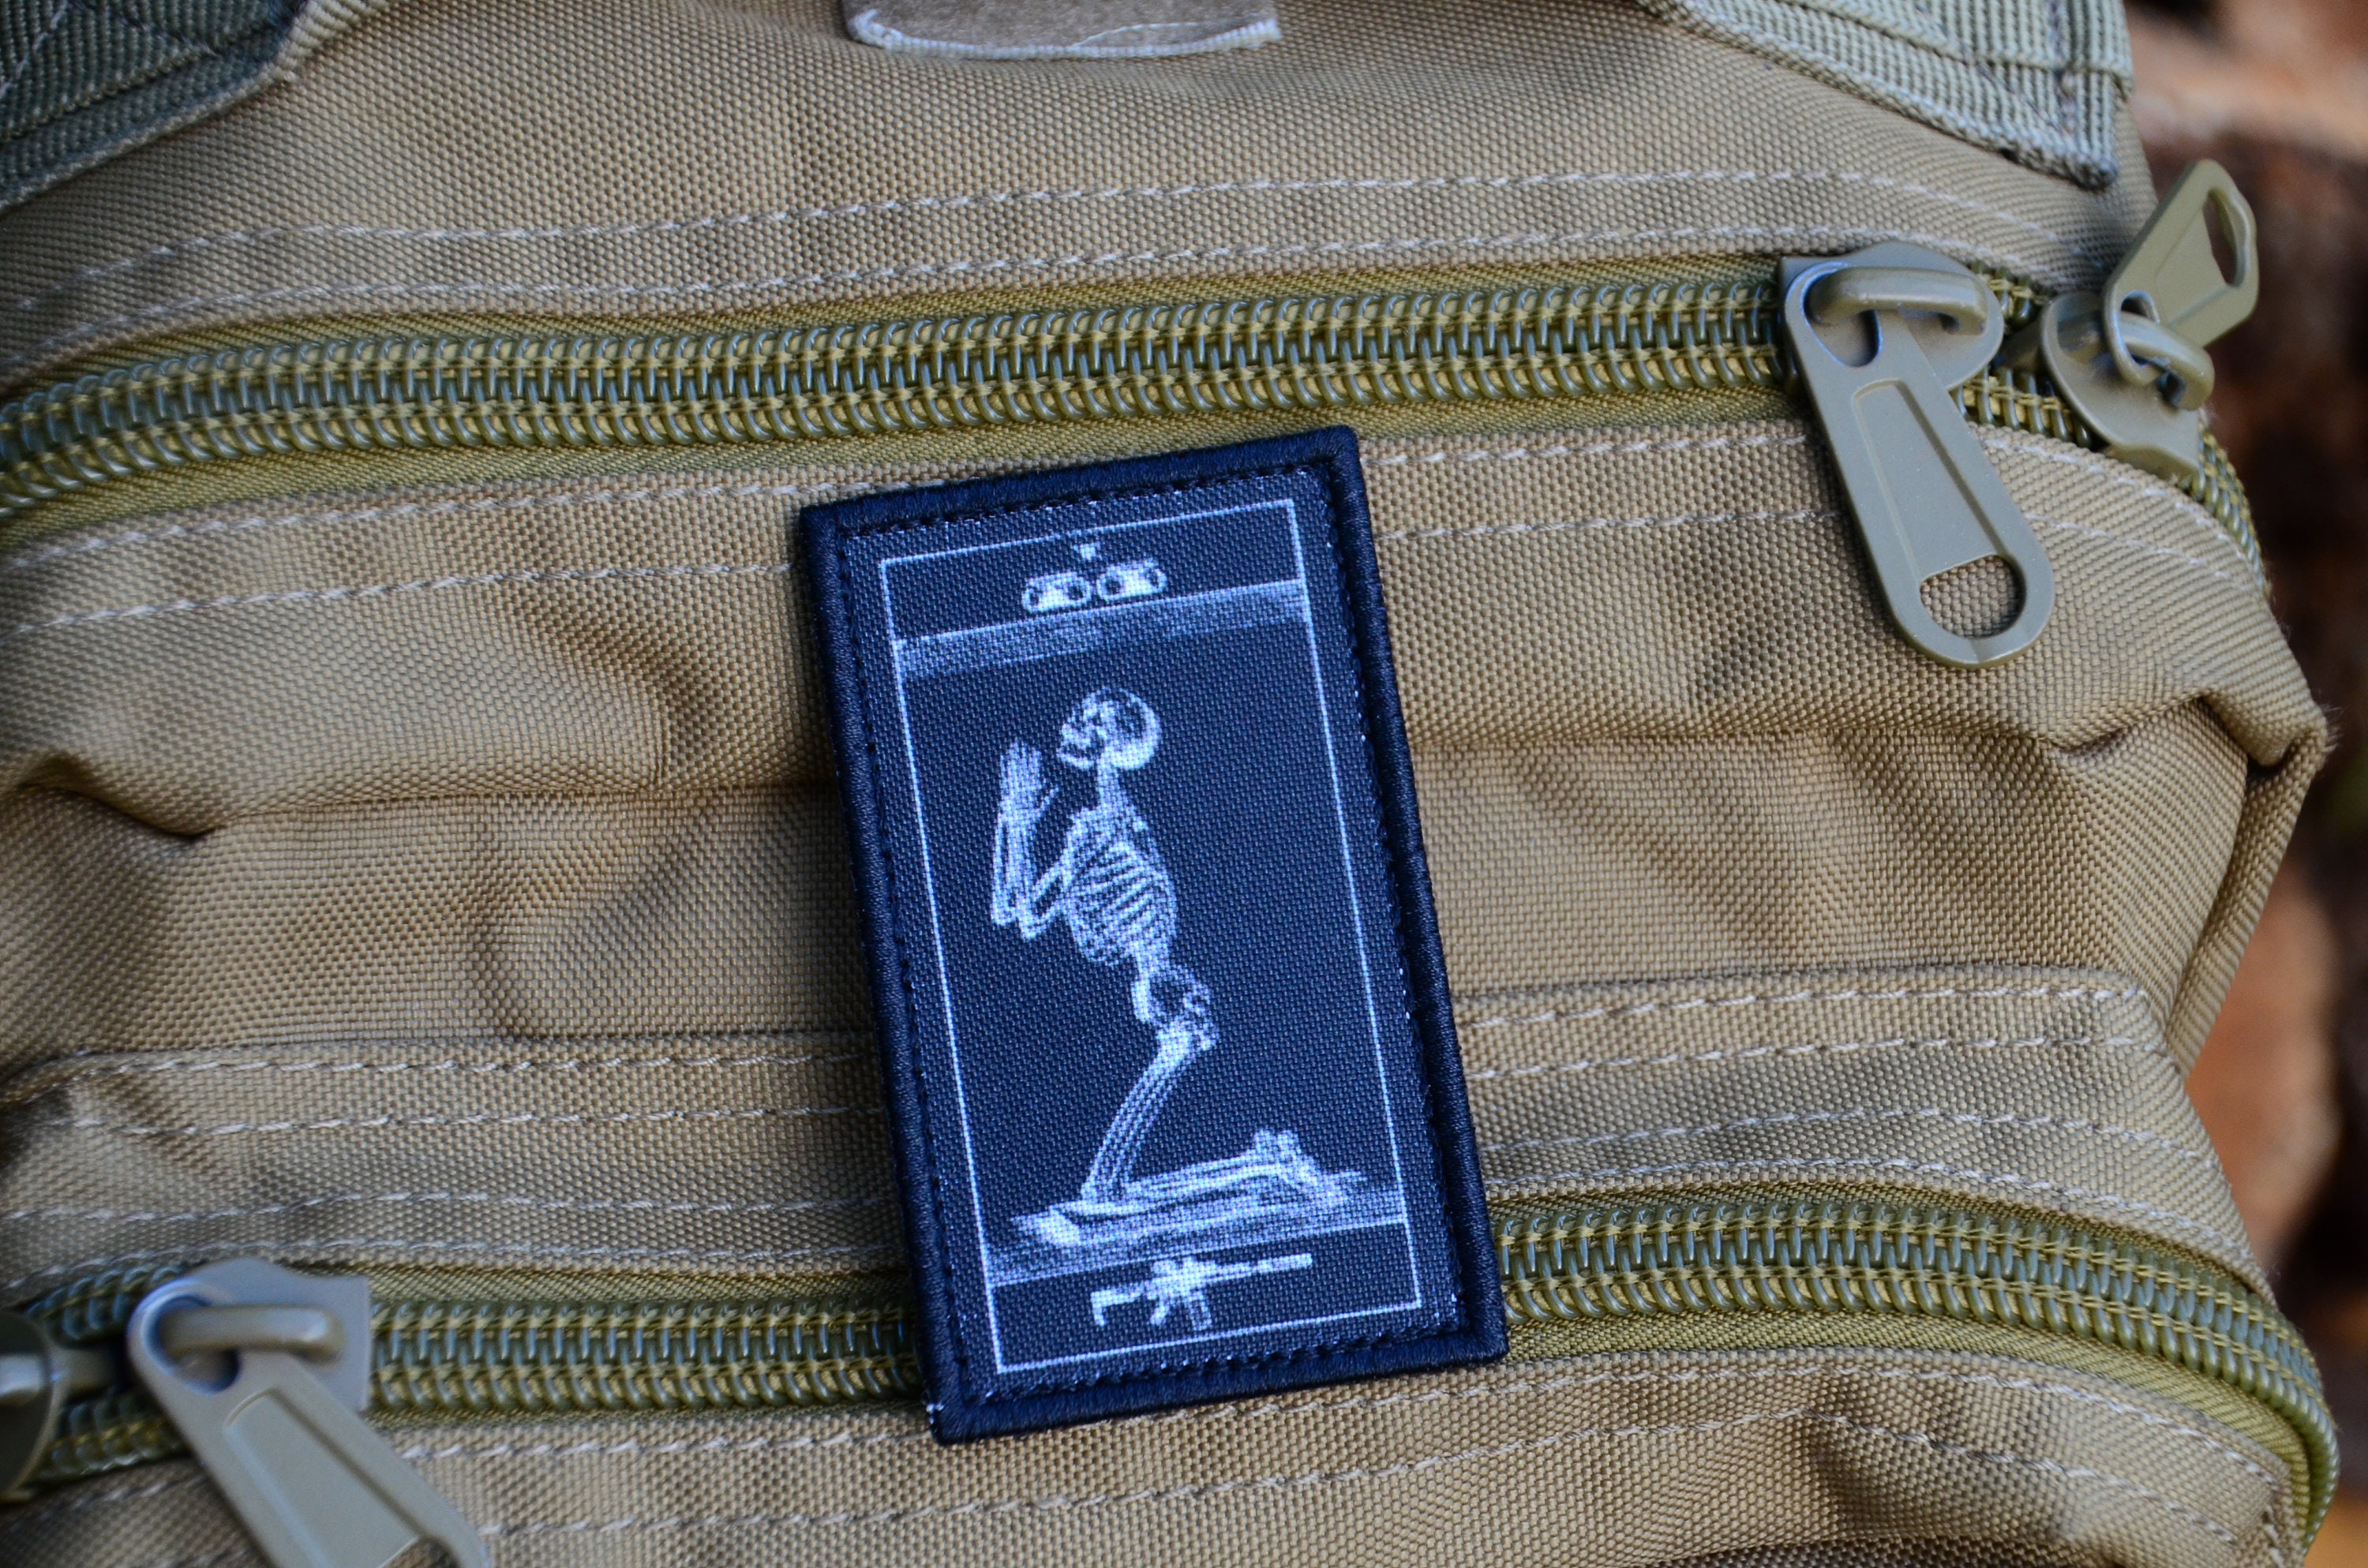 The Tactical Tarot Forward cards army morale patch